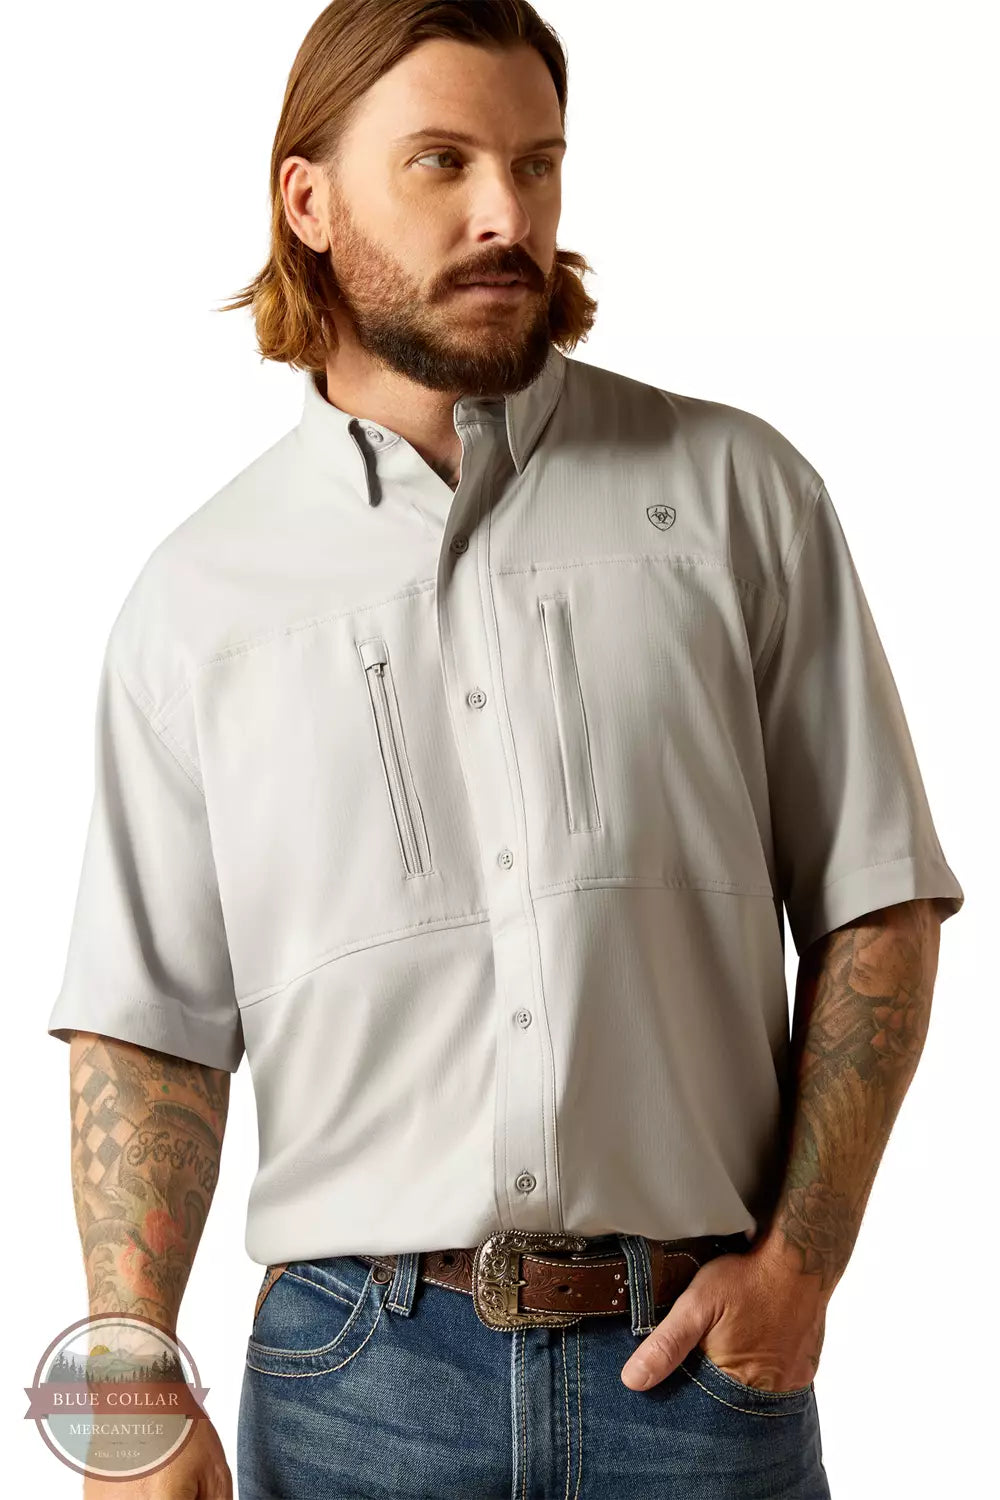 Ariat 10048846 VentTEK Classic Fit Shirt in Silver Lining Front View